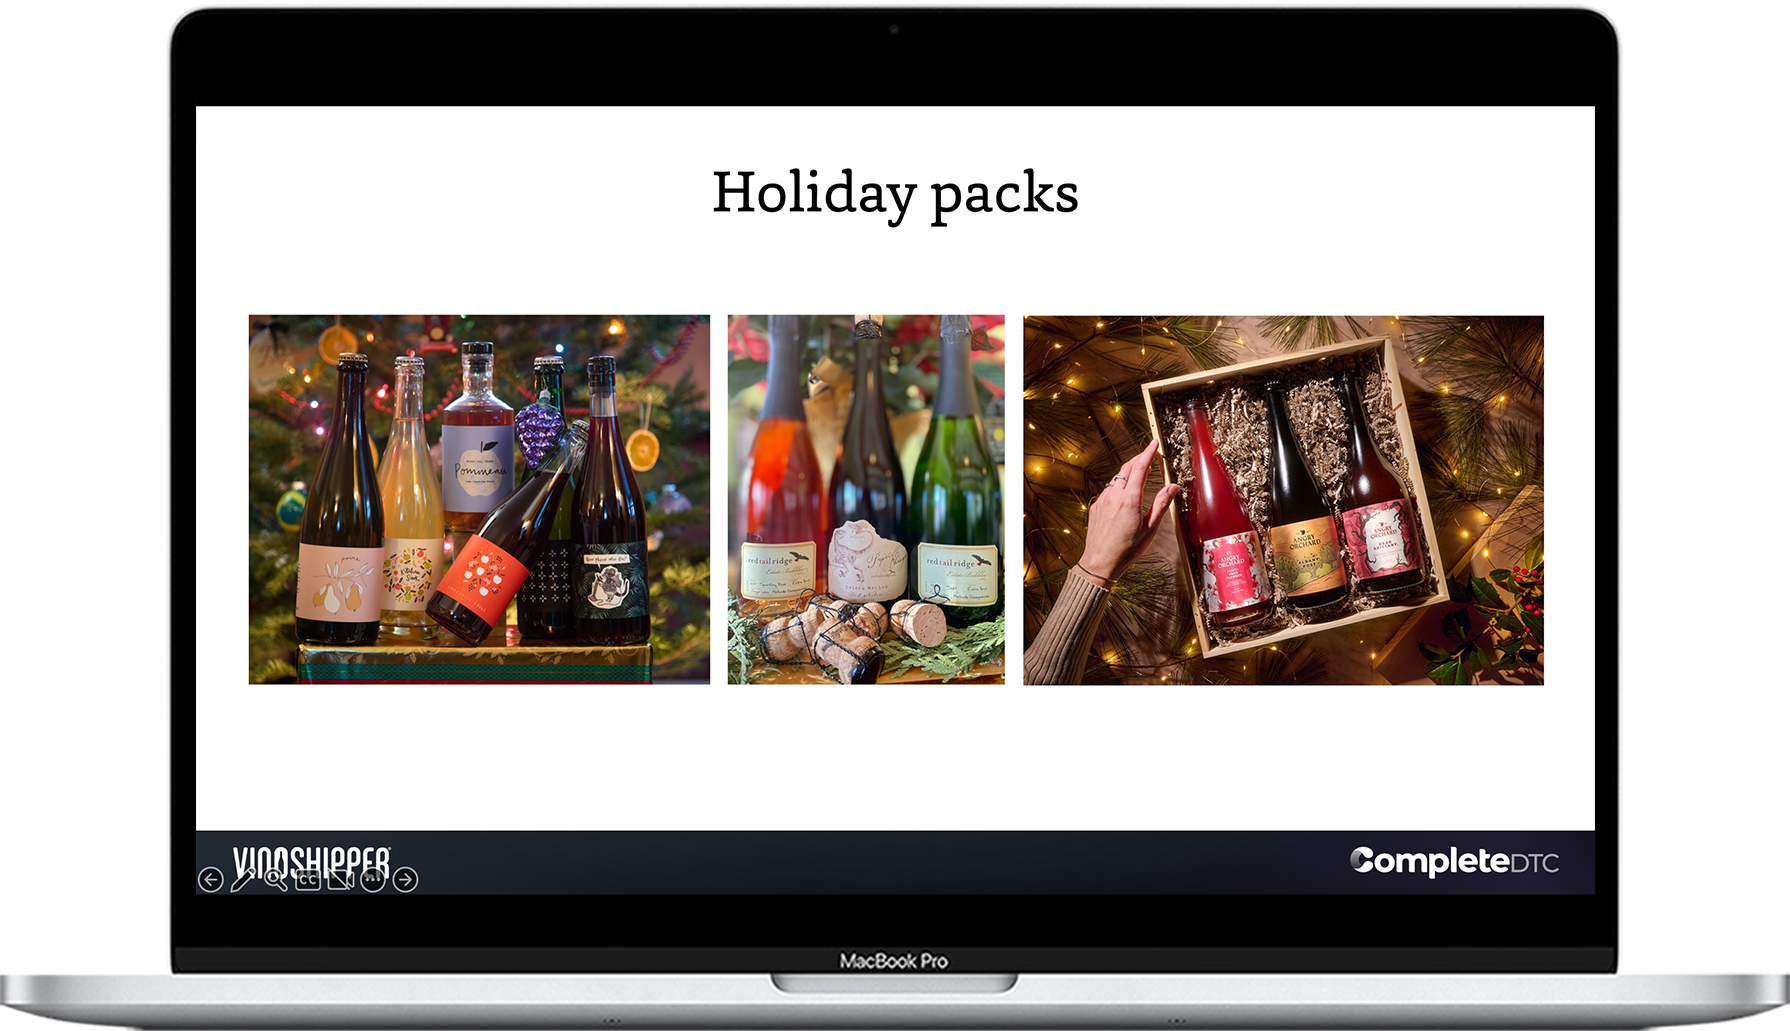 Holiday packs powerpoint slide on laptop